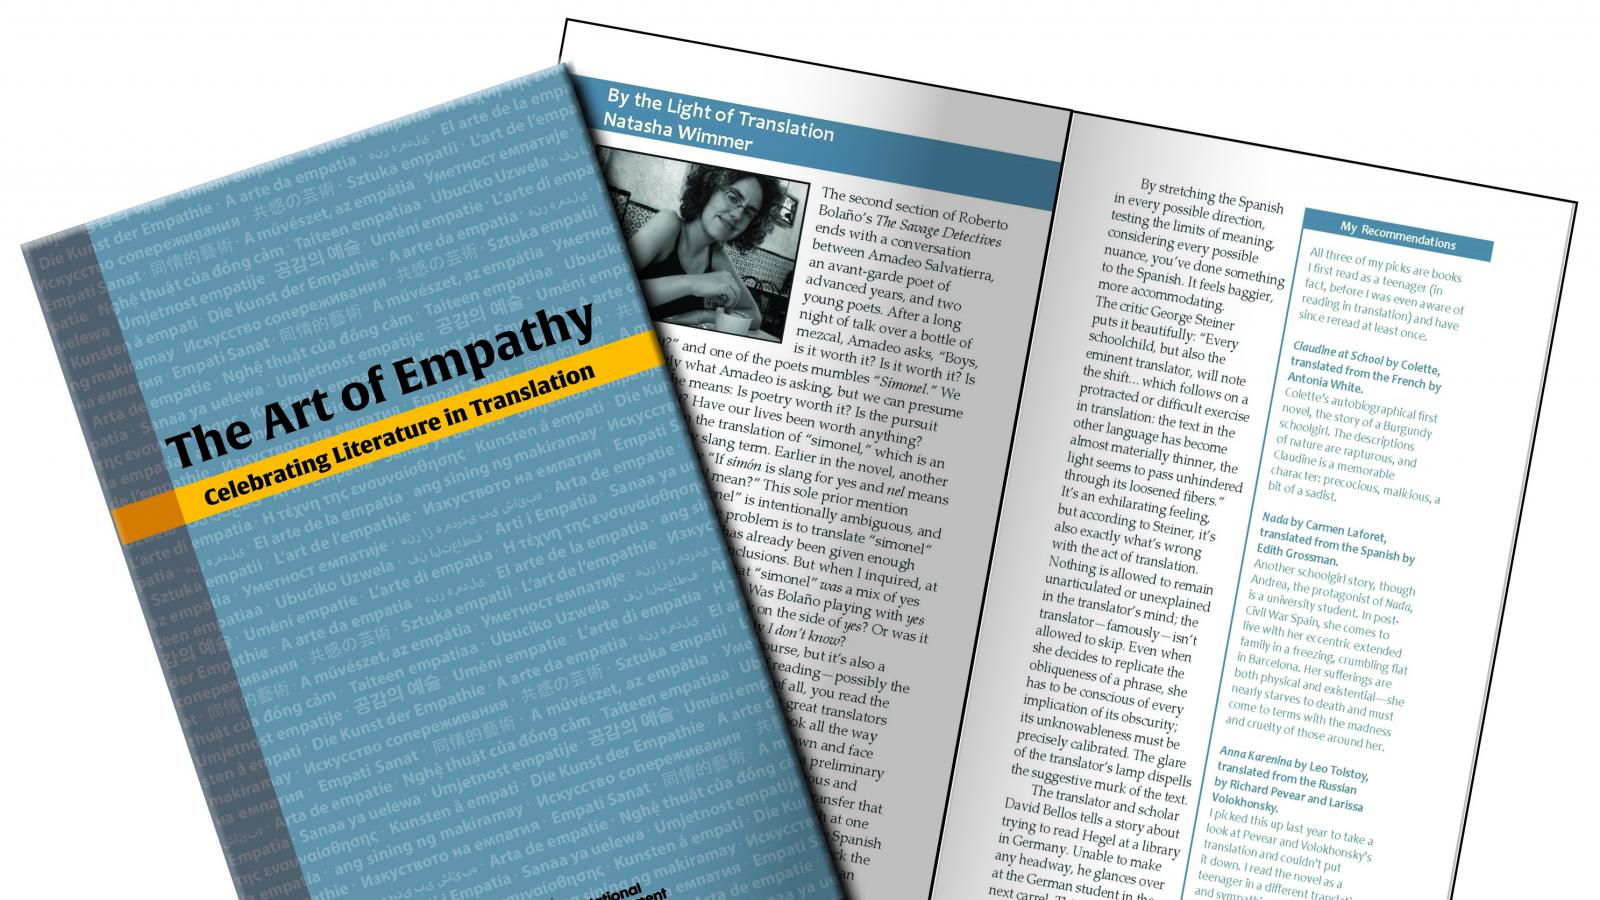 Cover of "The Art of Empathy' and full page spread